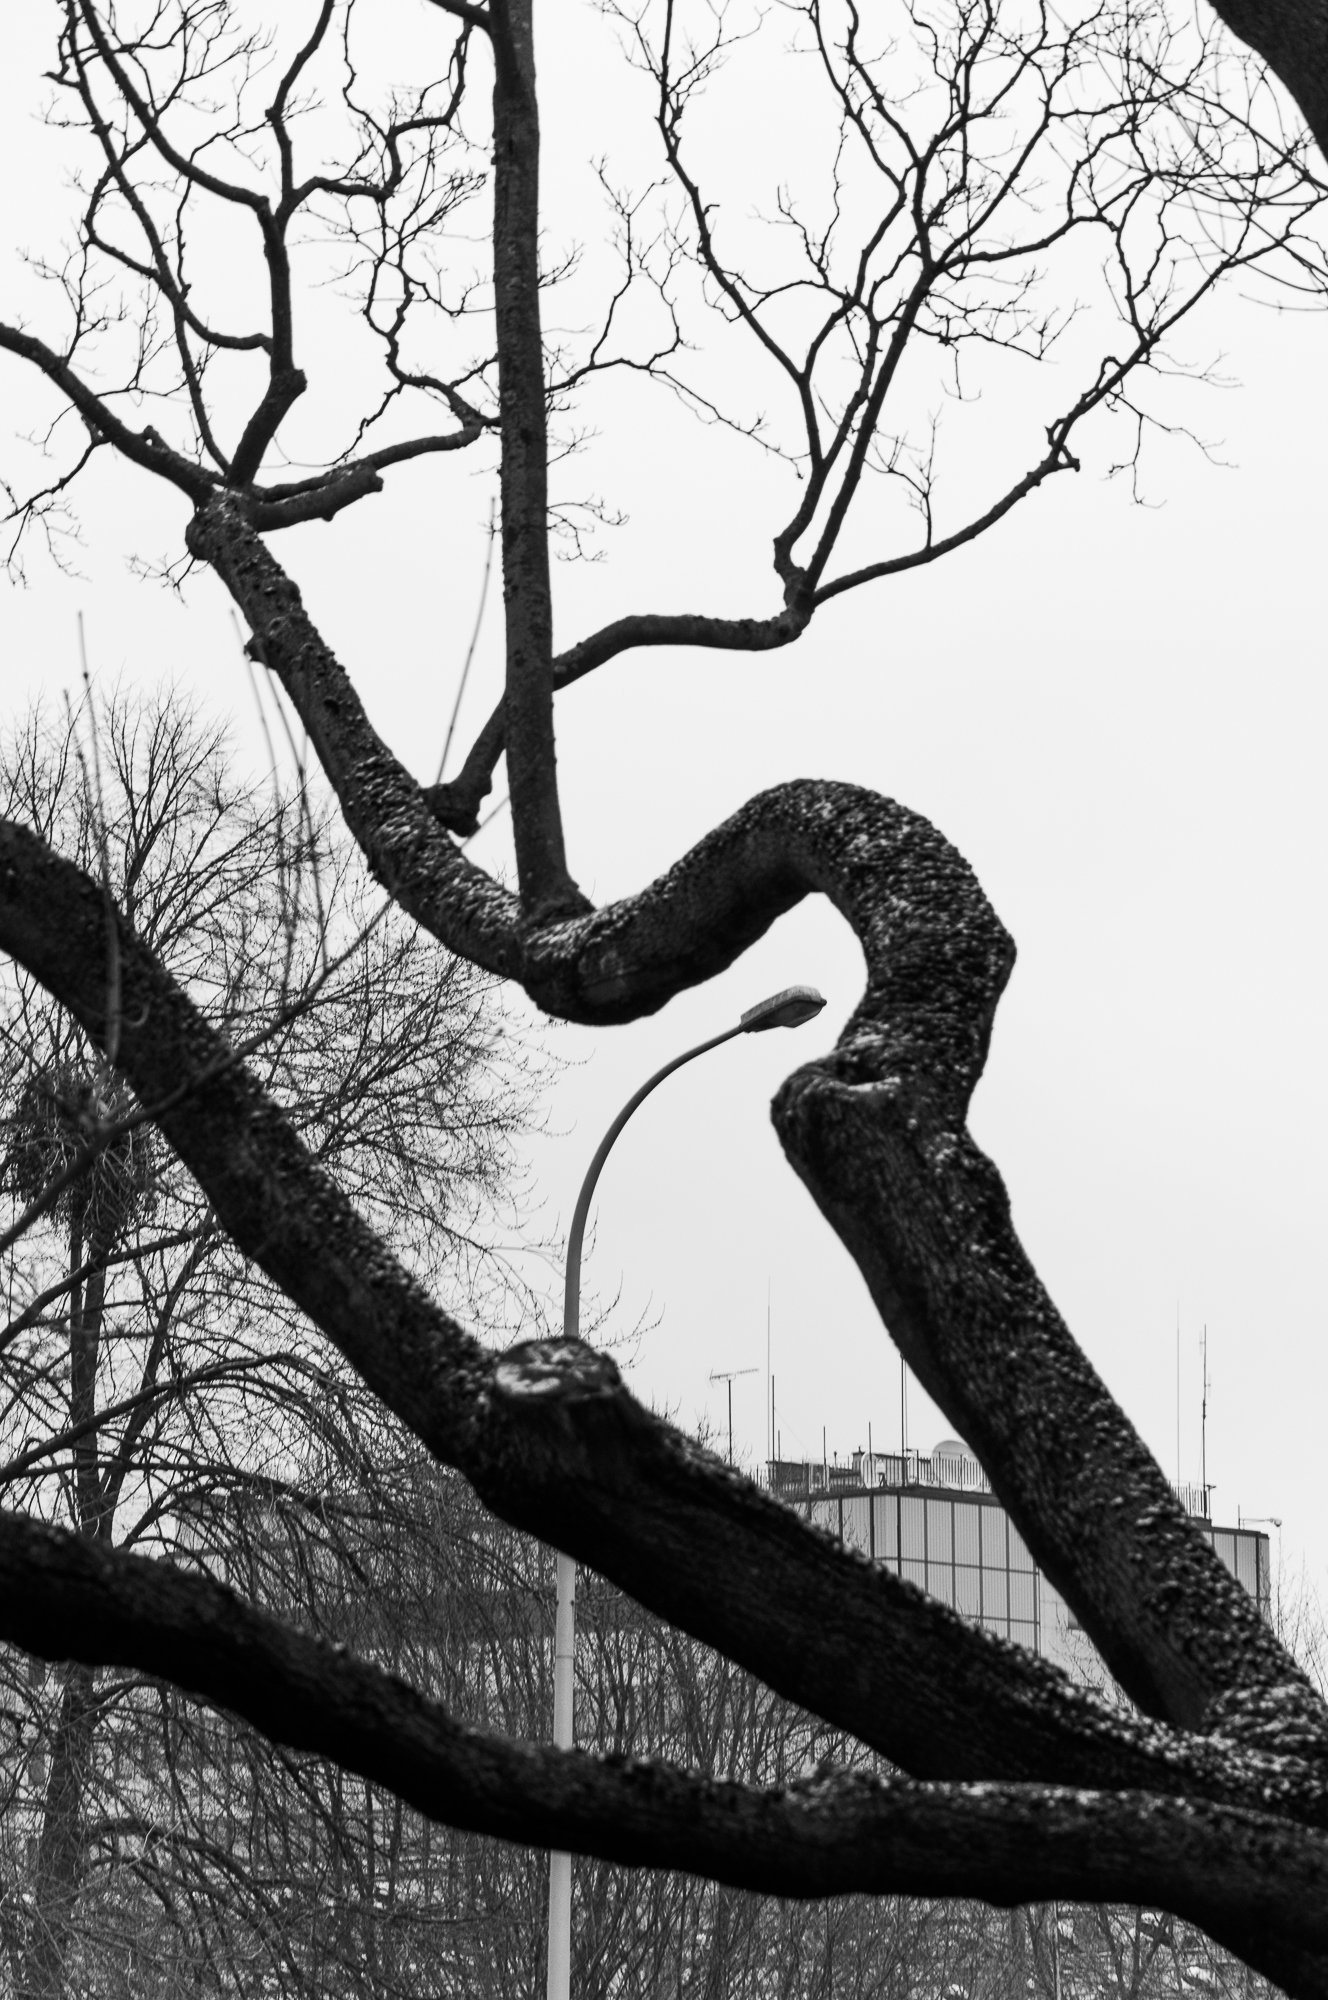 Adam Mazek Photography Warsaw 2018. Minimalism. Branches of the tree and the street lamp. Inspired by Hiroshige.